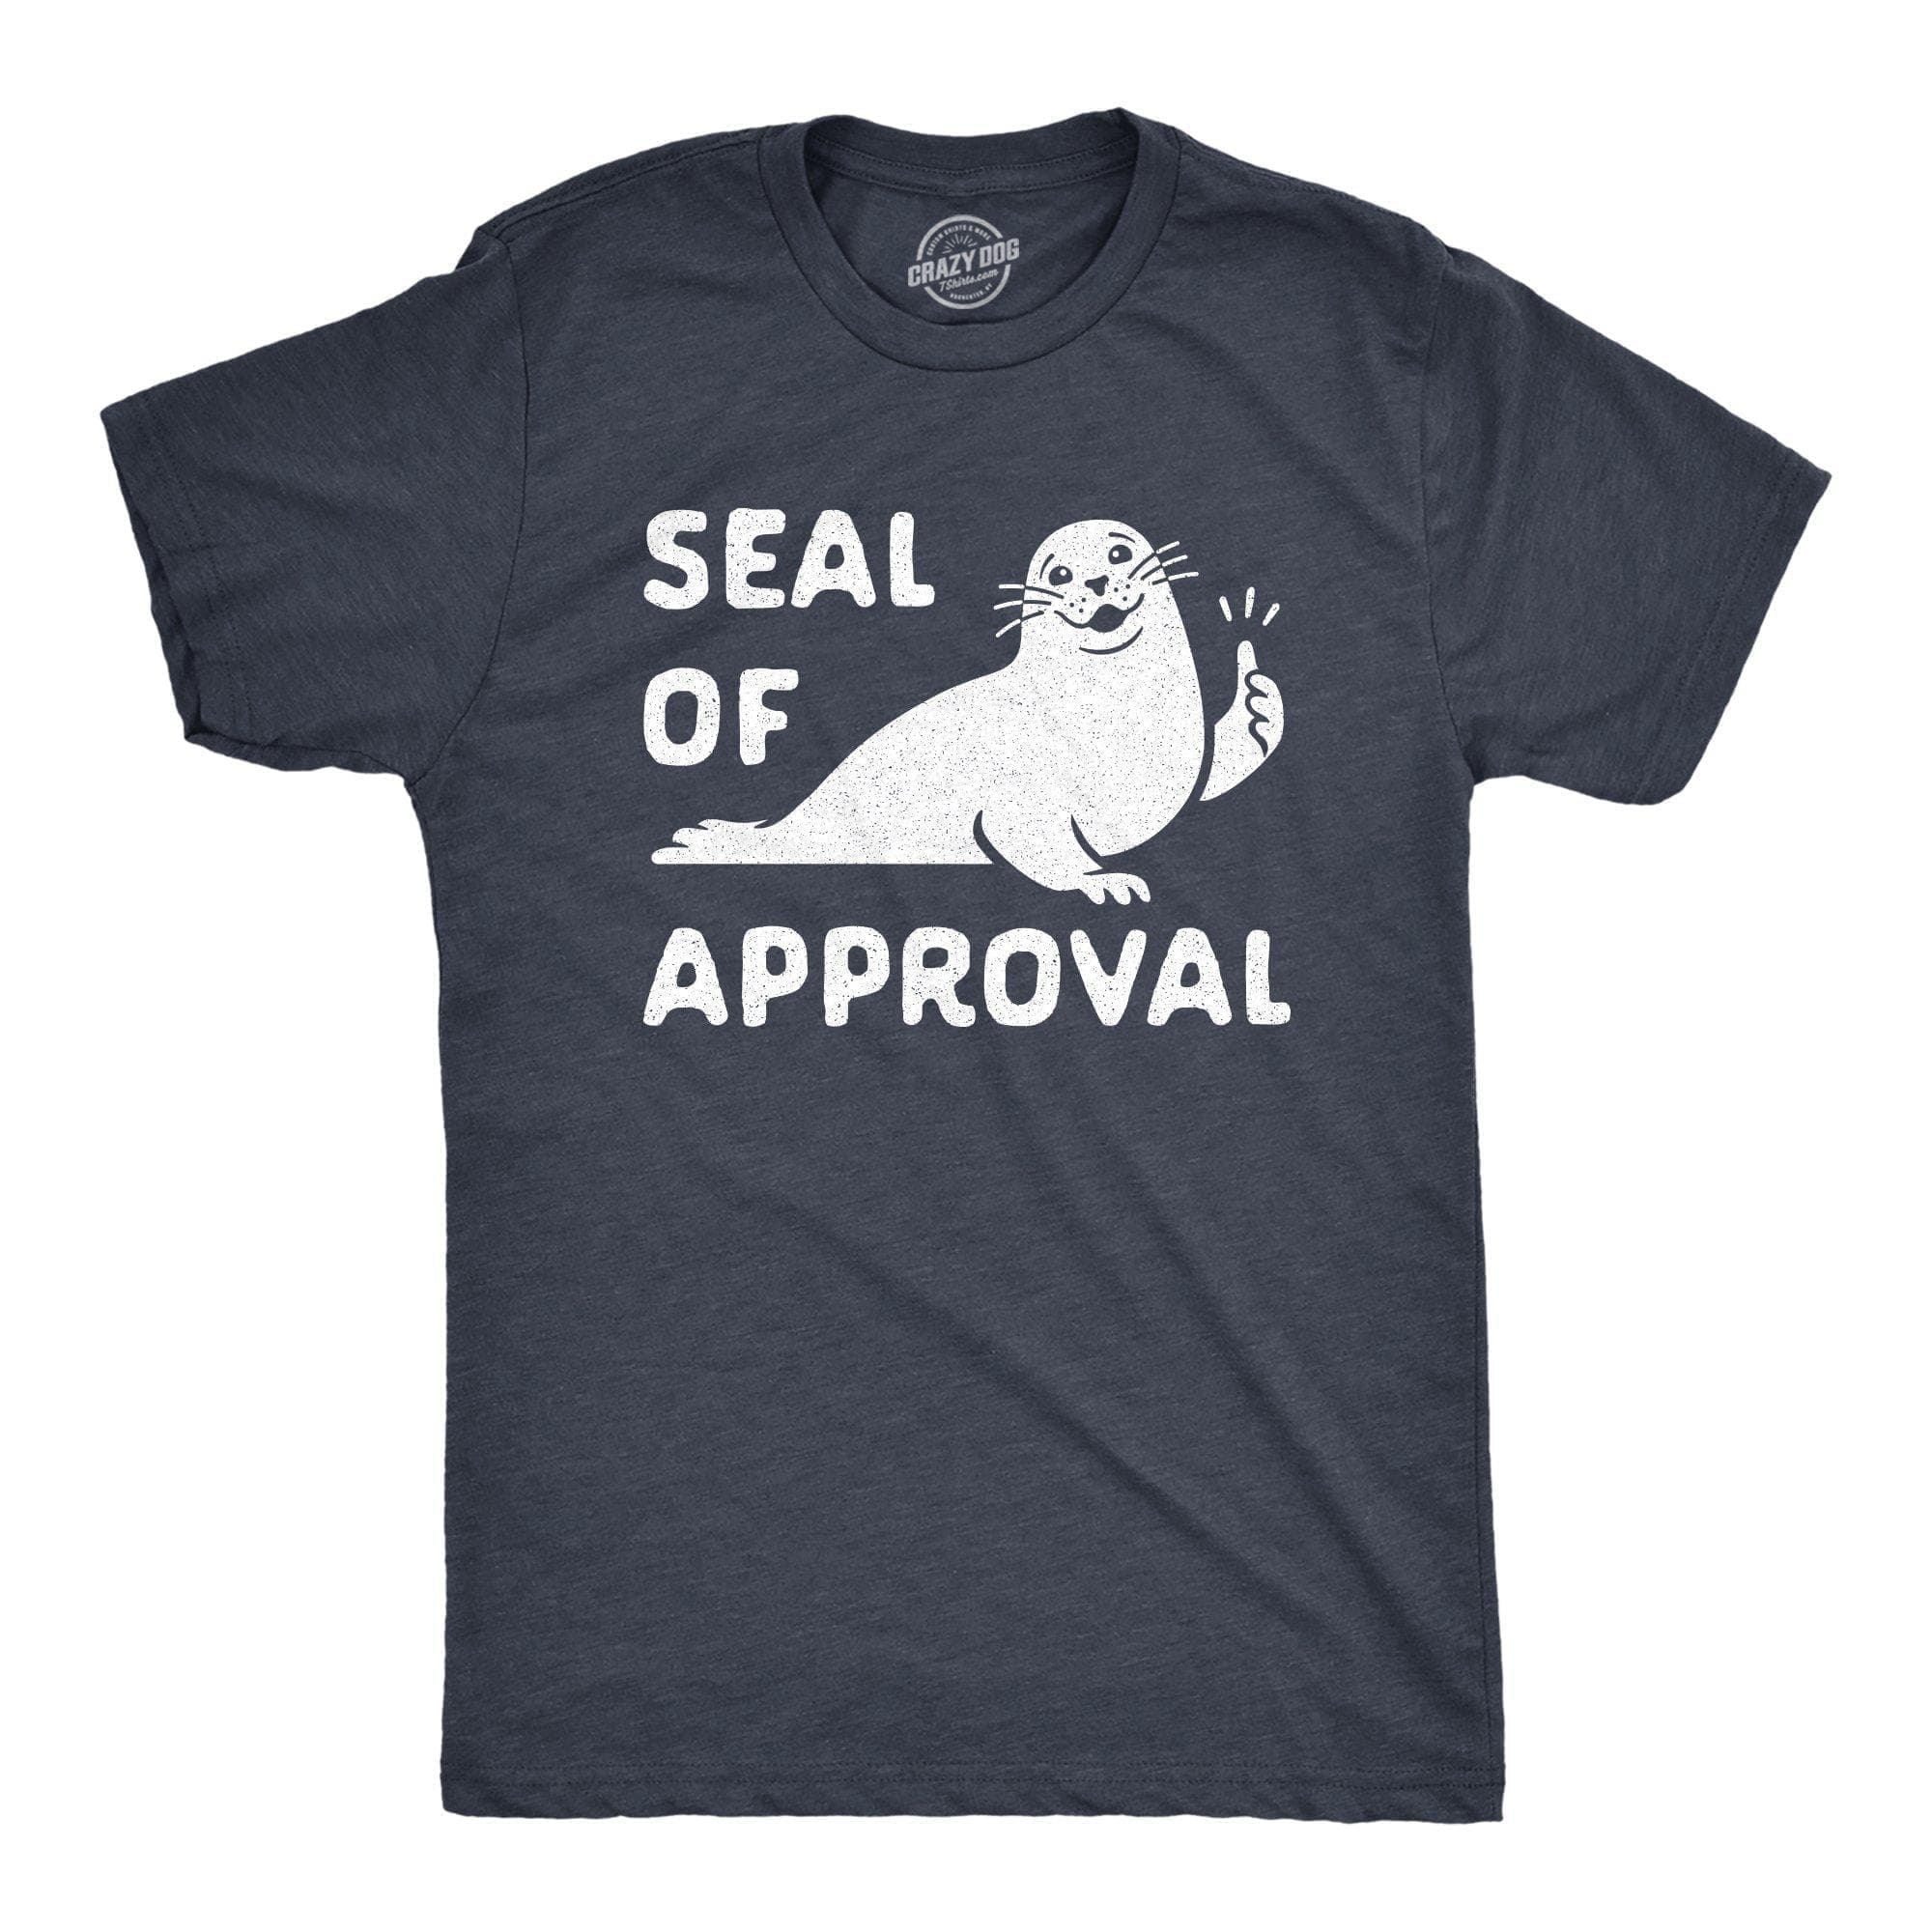 Seal Of Approval Men's Tshirt - Crazy Dog T-Shirts